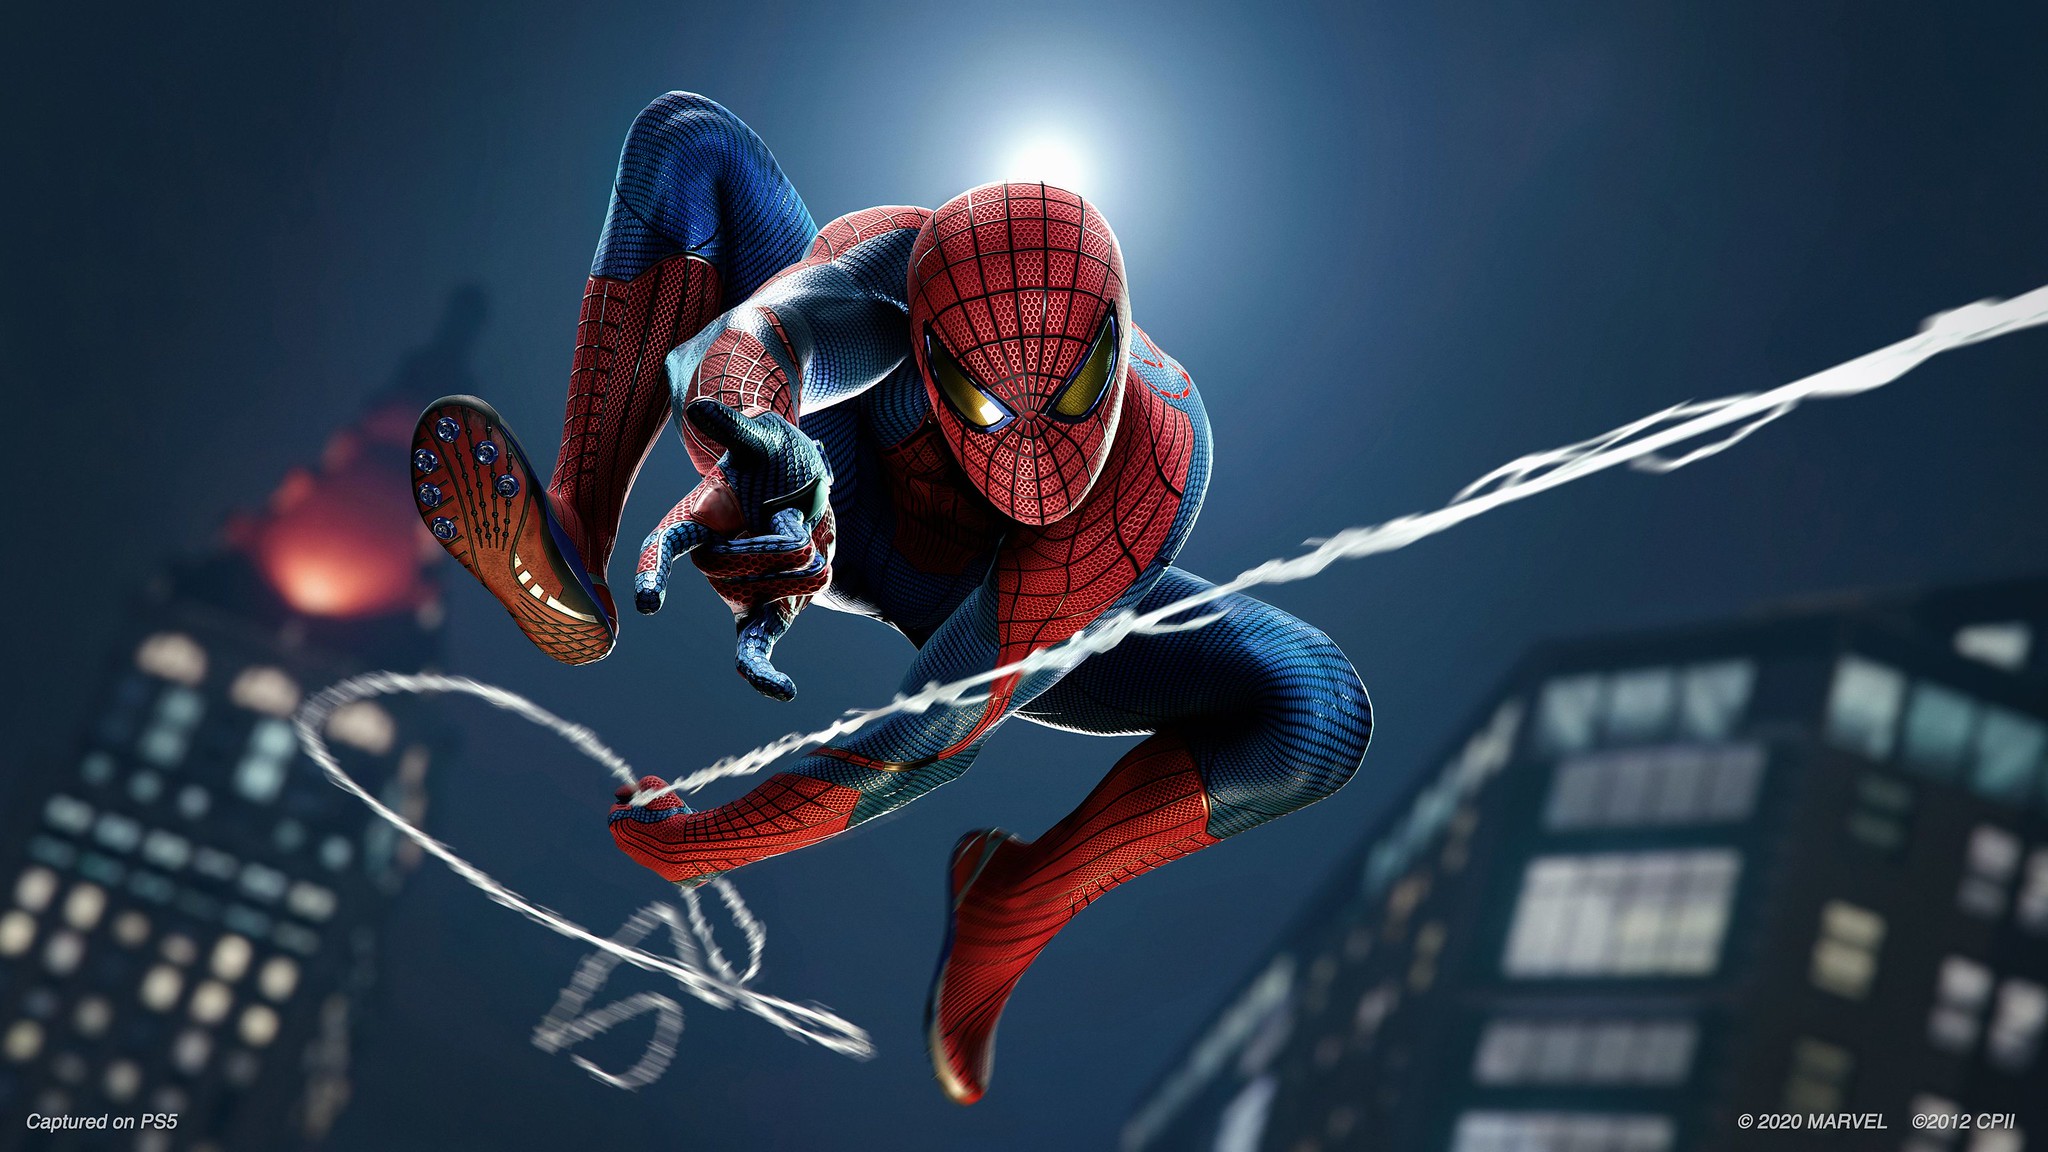 Marvel's Spider-Man Remastered is finally available as a